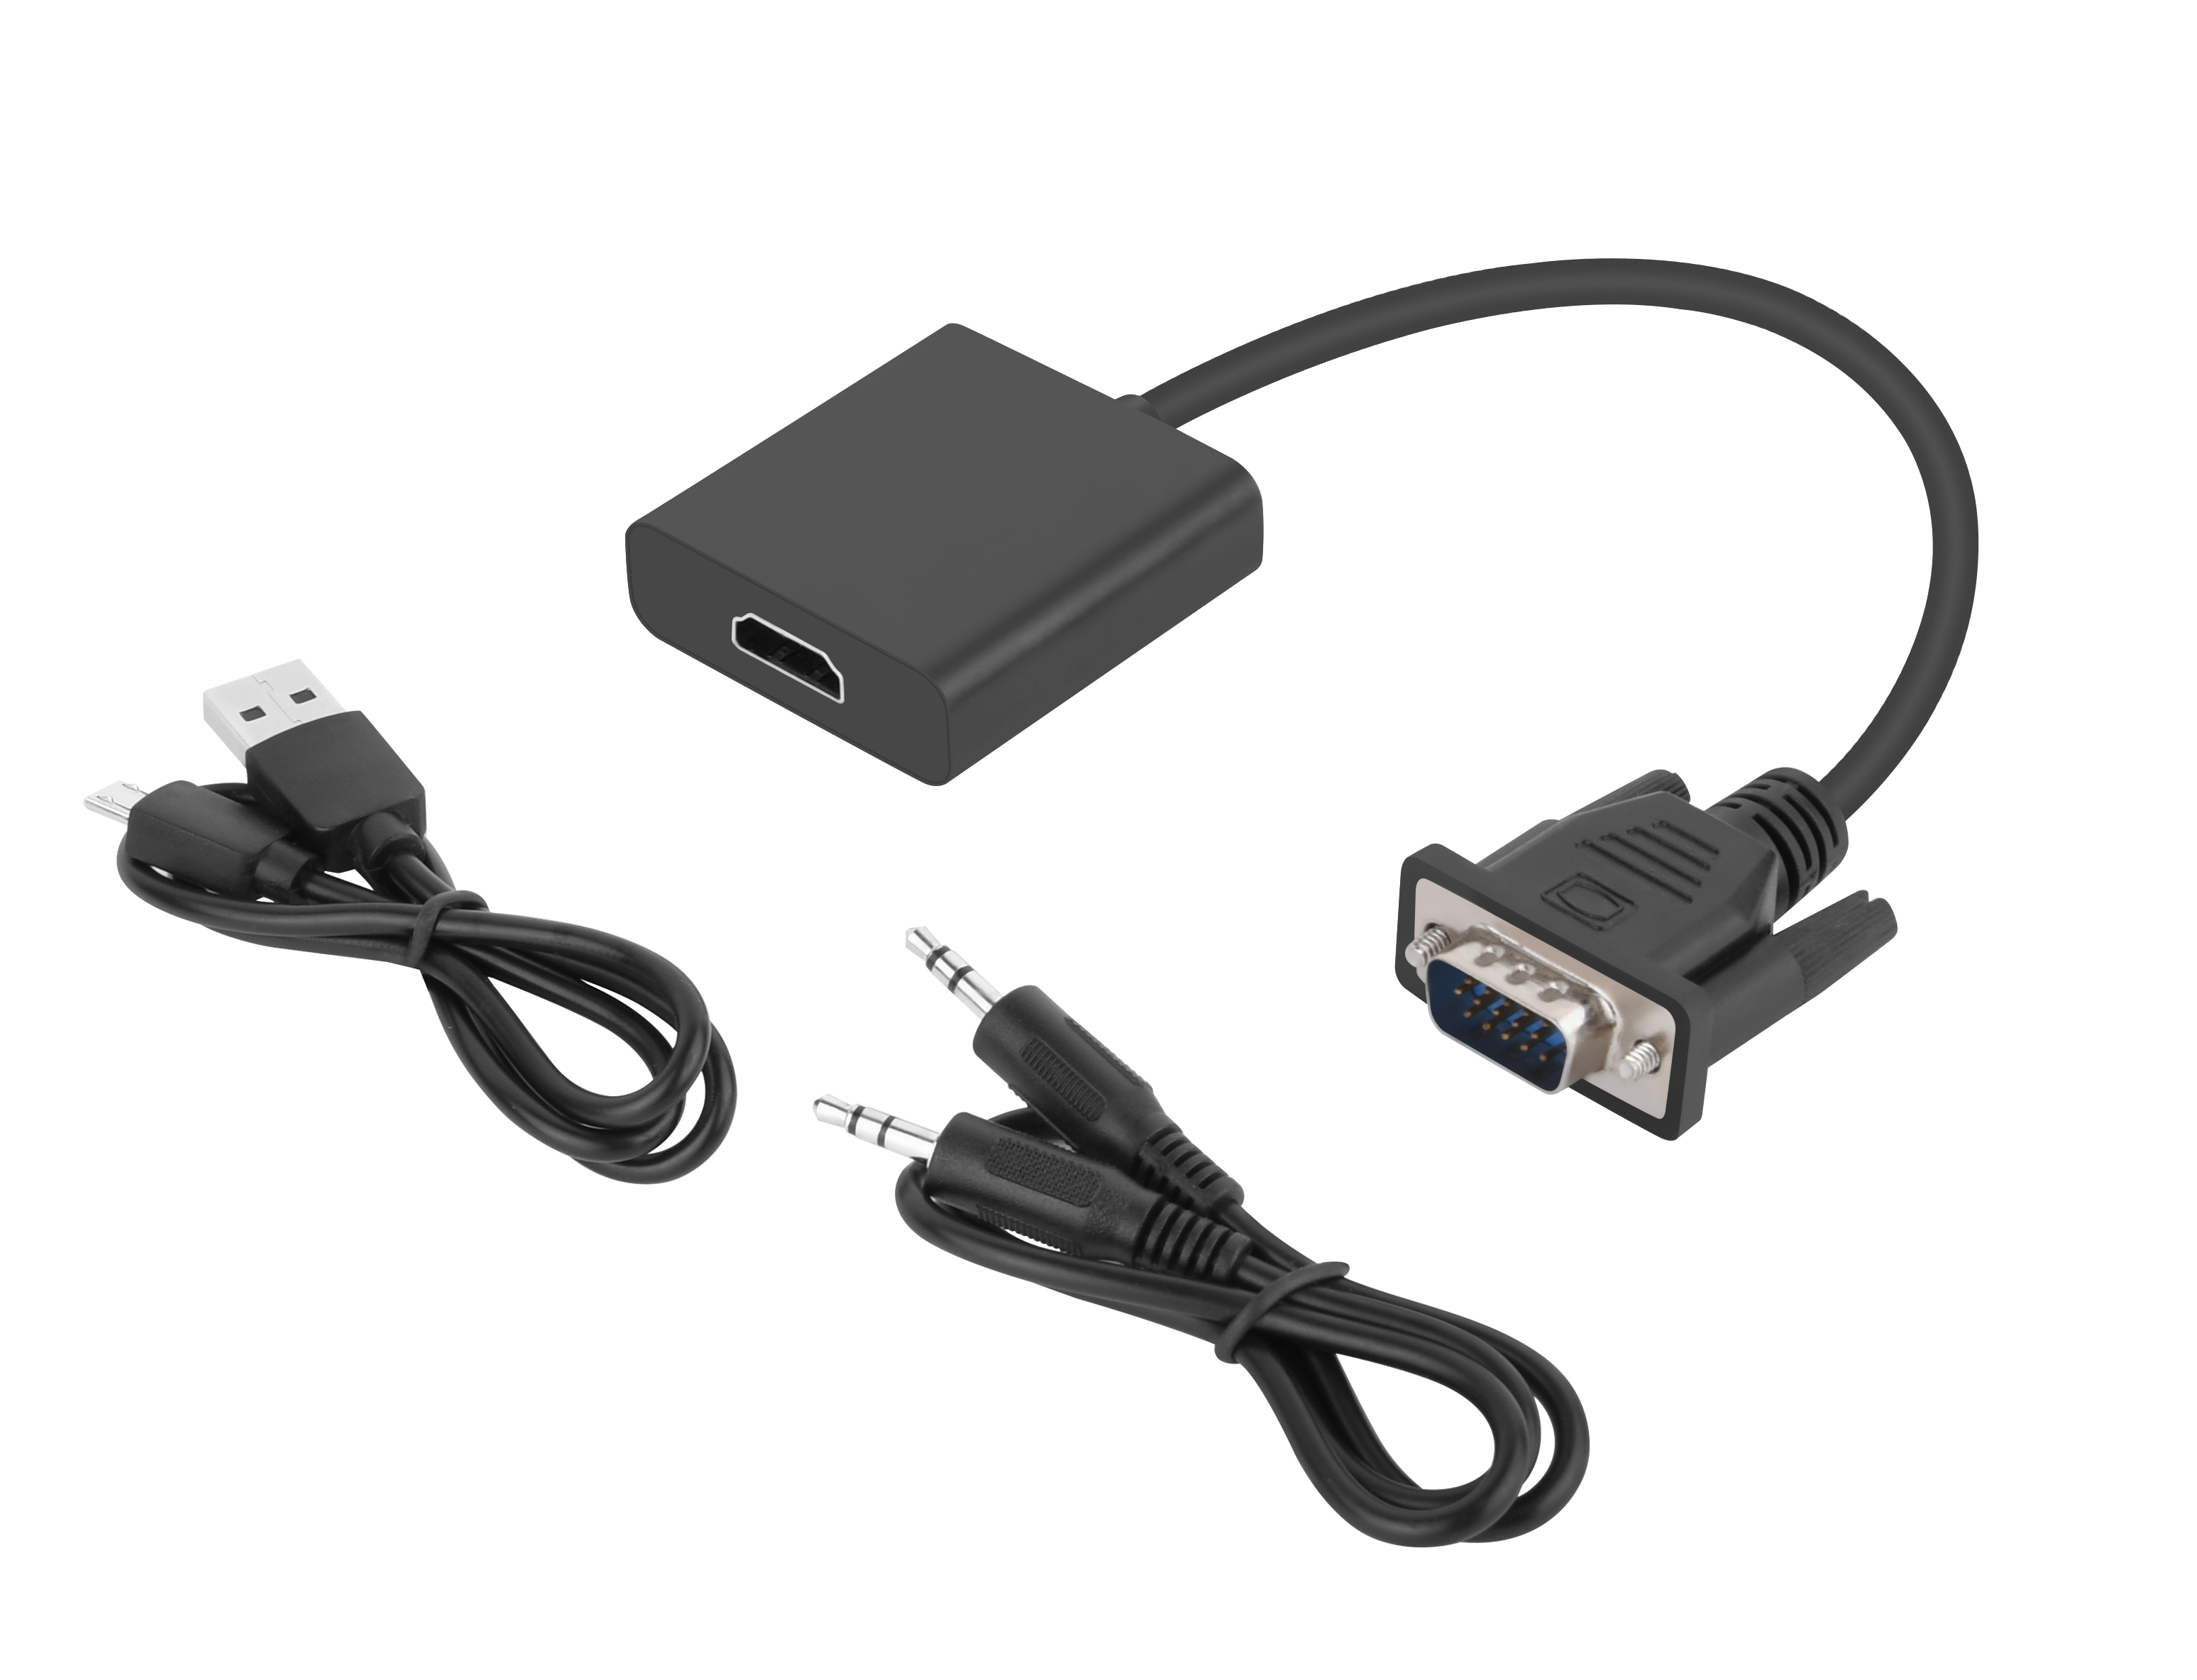 VGA to hdmi with auido and power cable